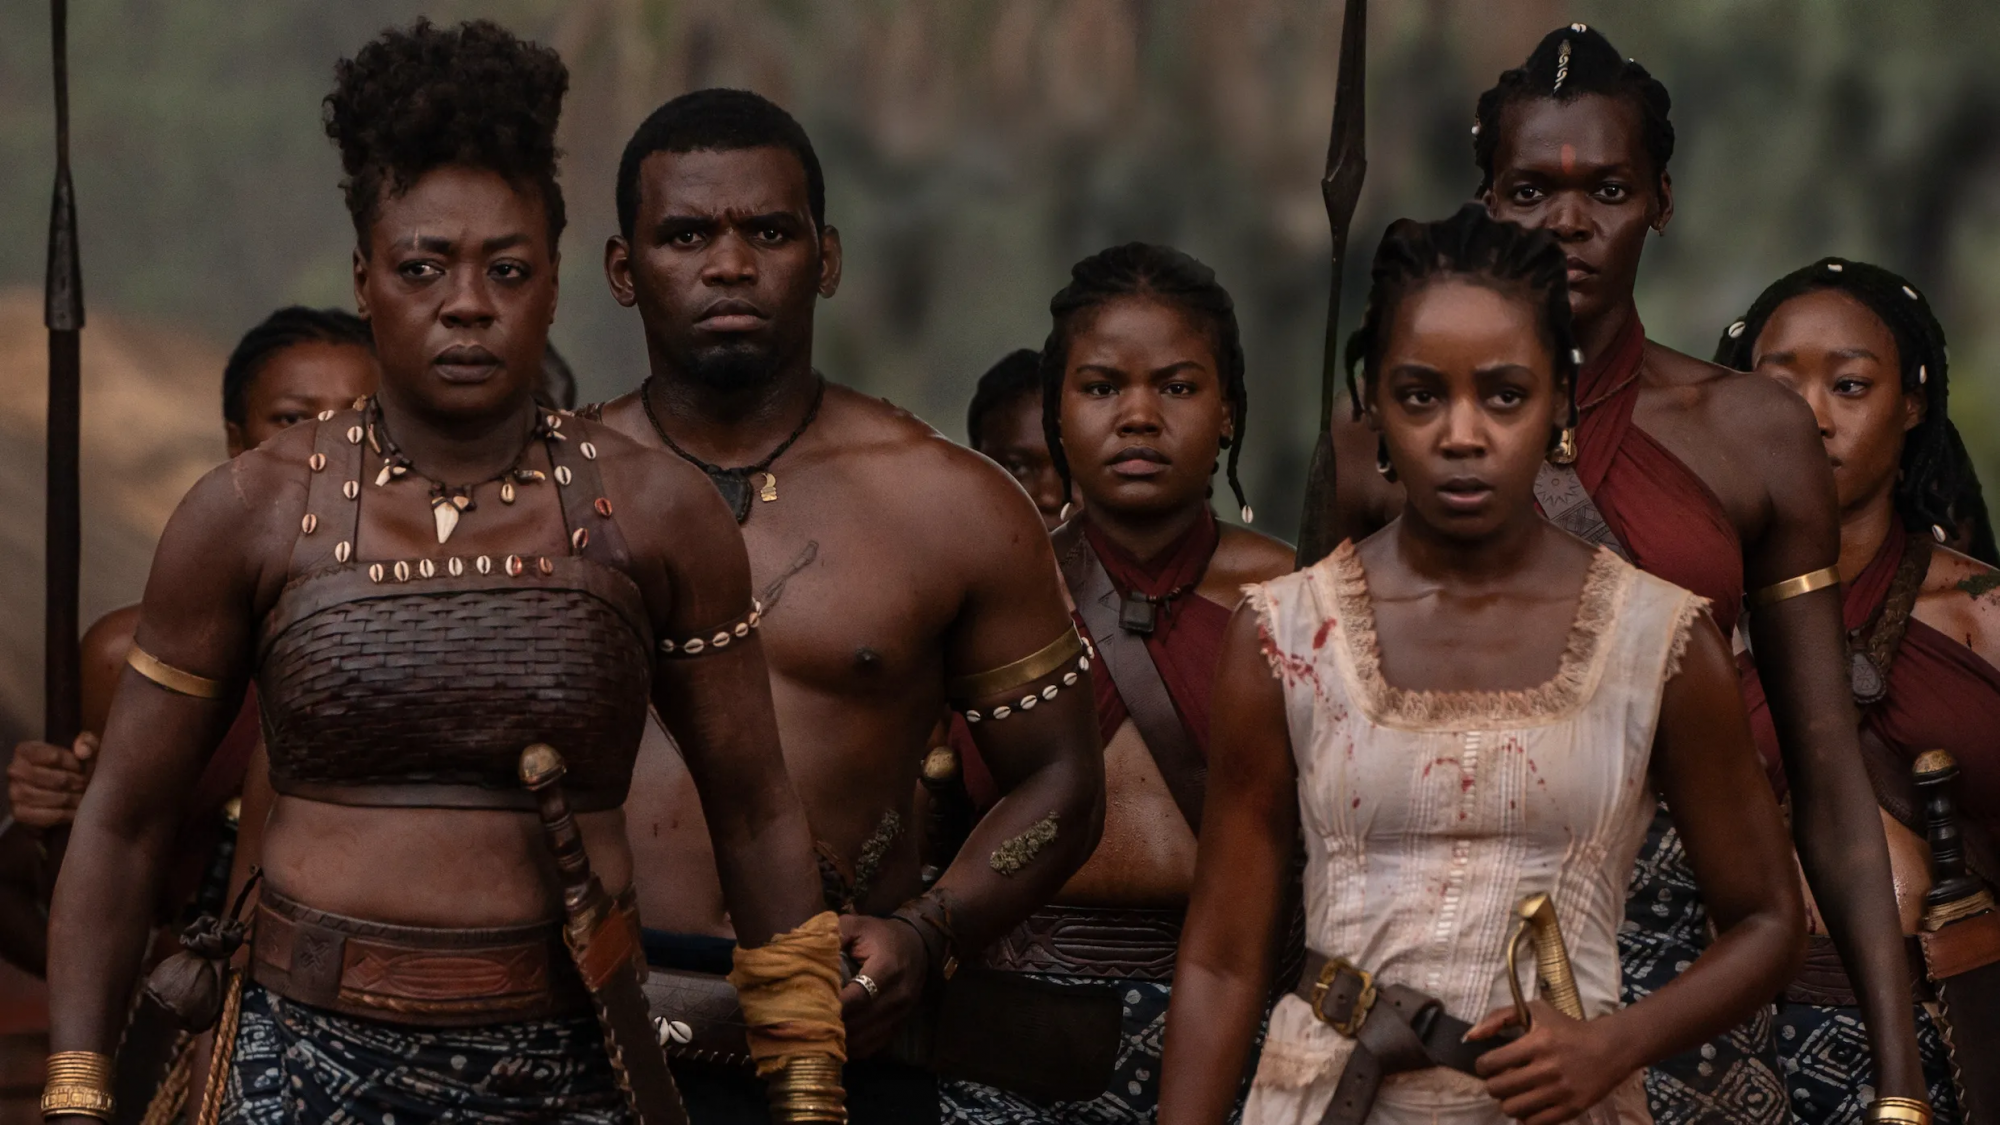 'The Woman King' Film Tops Box Office in North America